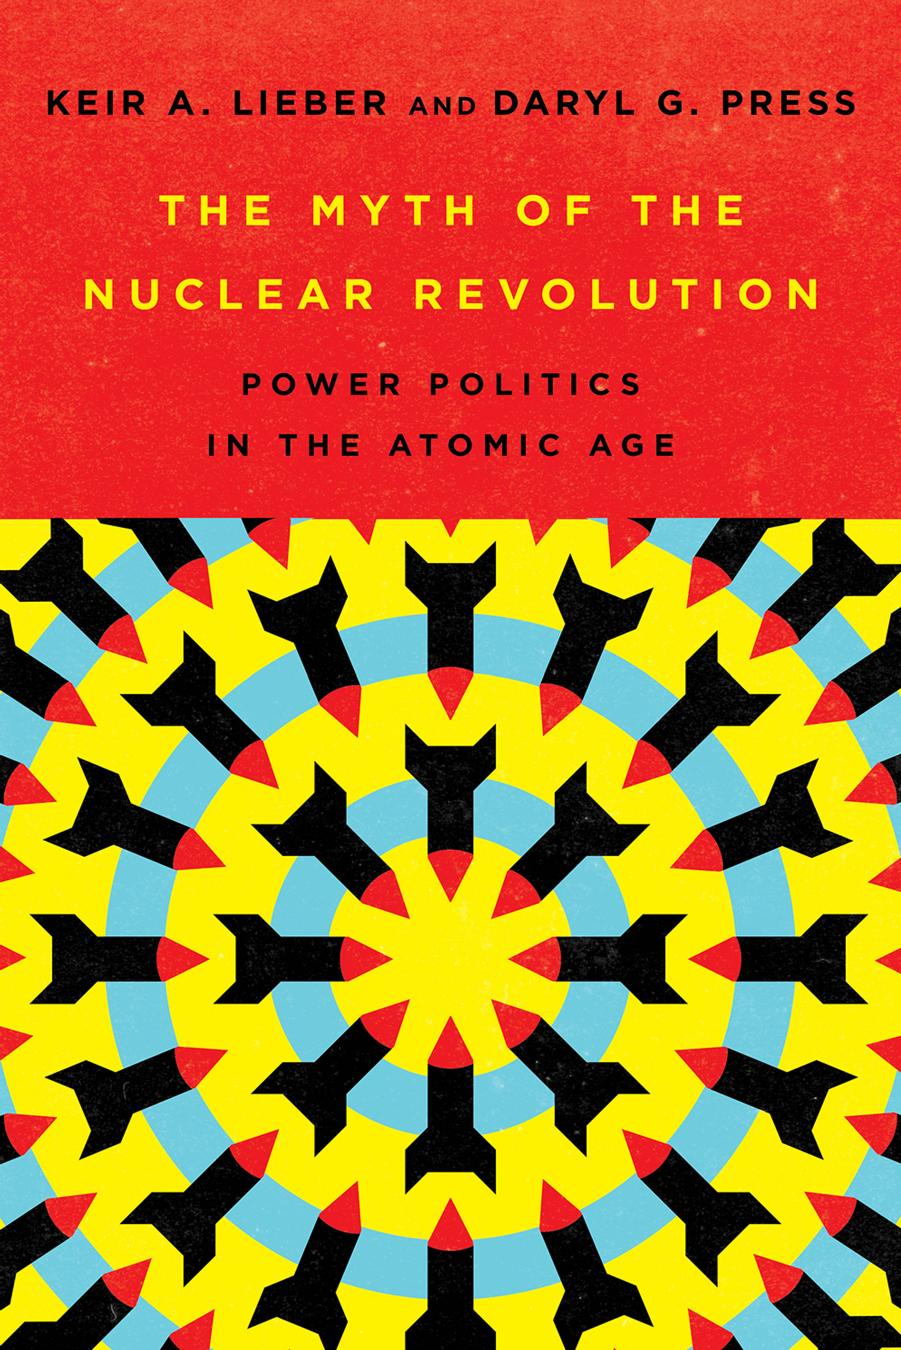 The Myth of the Nuclear Revolution: Power Politics in the Atomic Age by Keir A. Lieber & Daryl G. Press